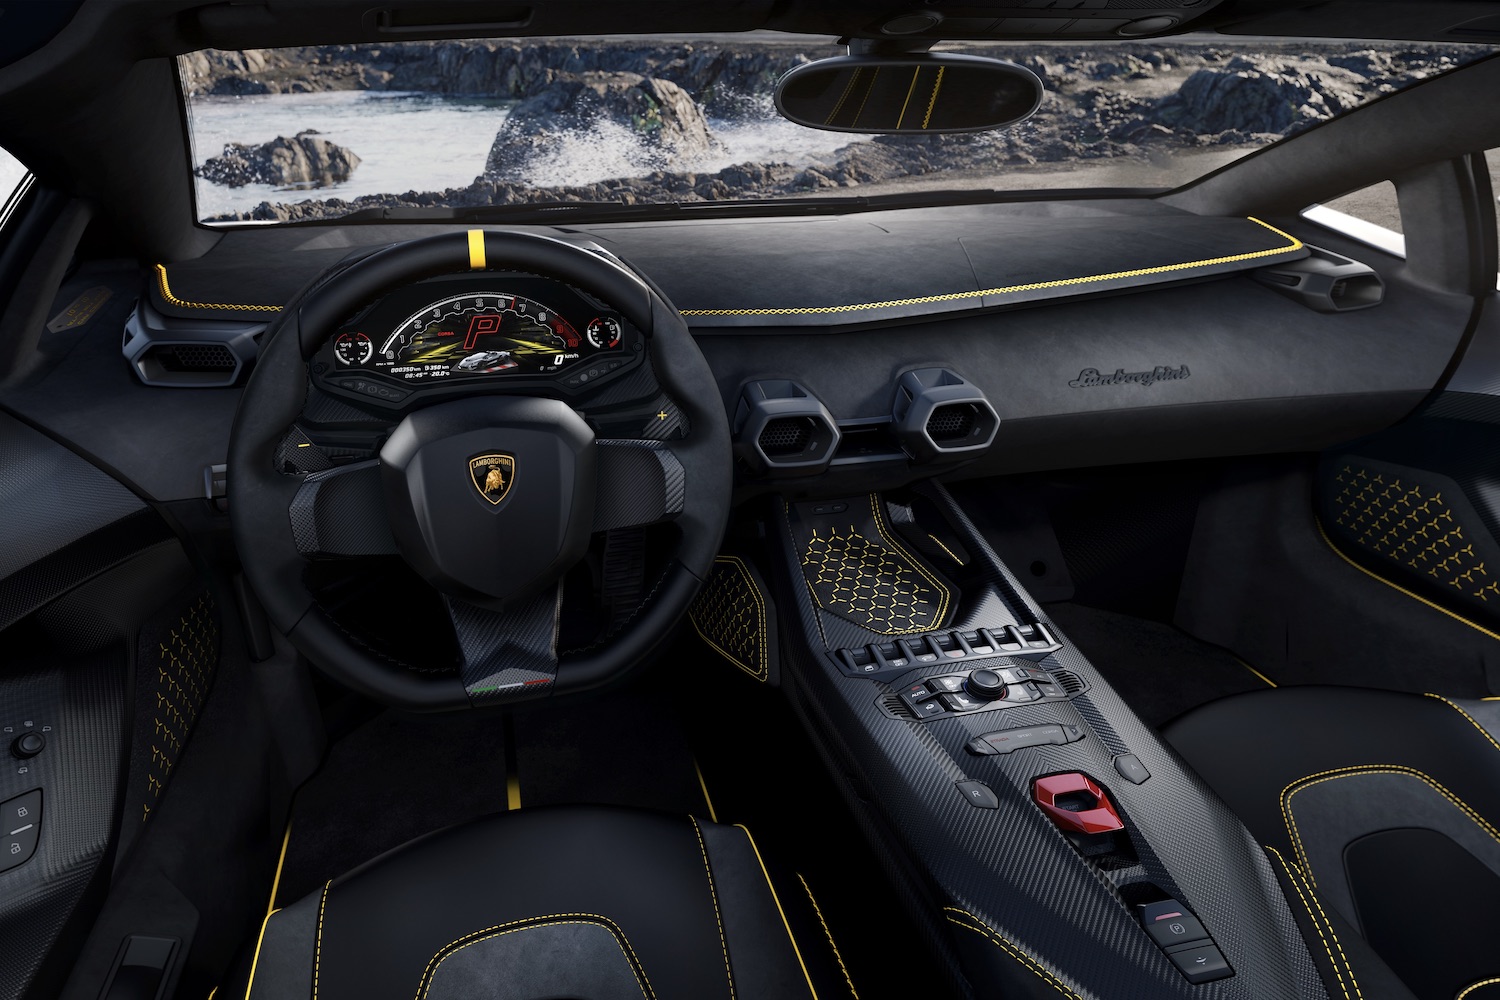 Close up of dashboard and steering wheel in the Lamborghini Auténtica with water and cliffs in the back.